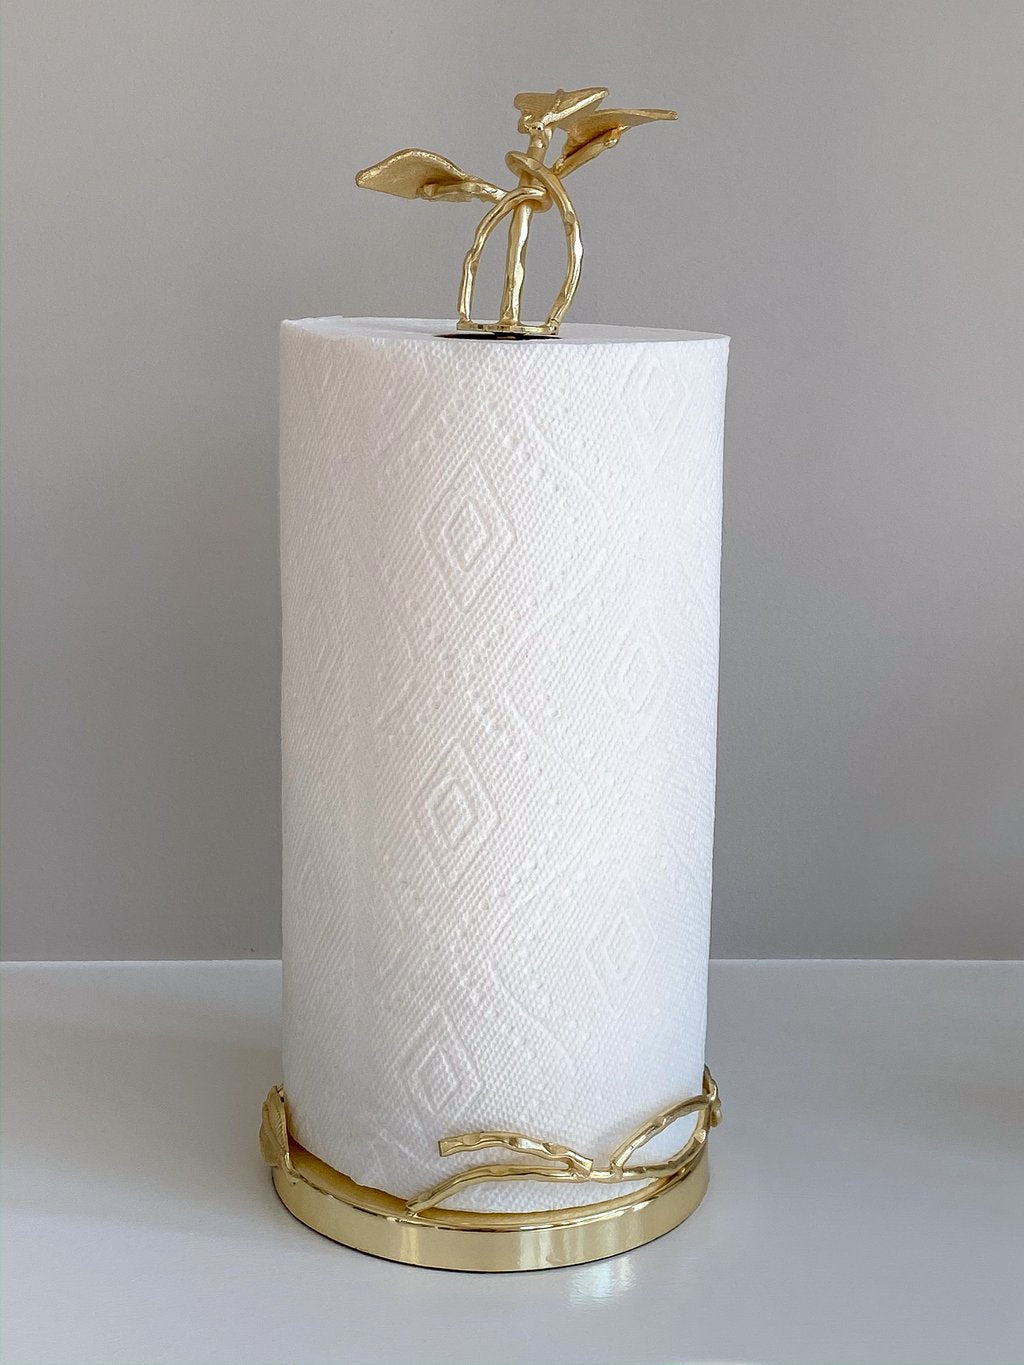 Gold Paper Towel Holder with Leaf Design - 7 Base – Classic Touch Decor